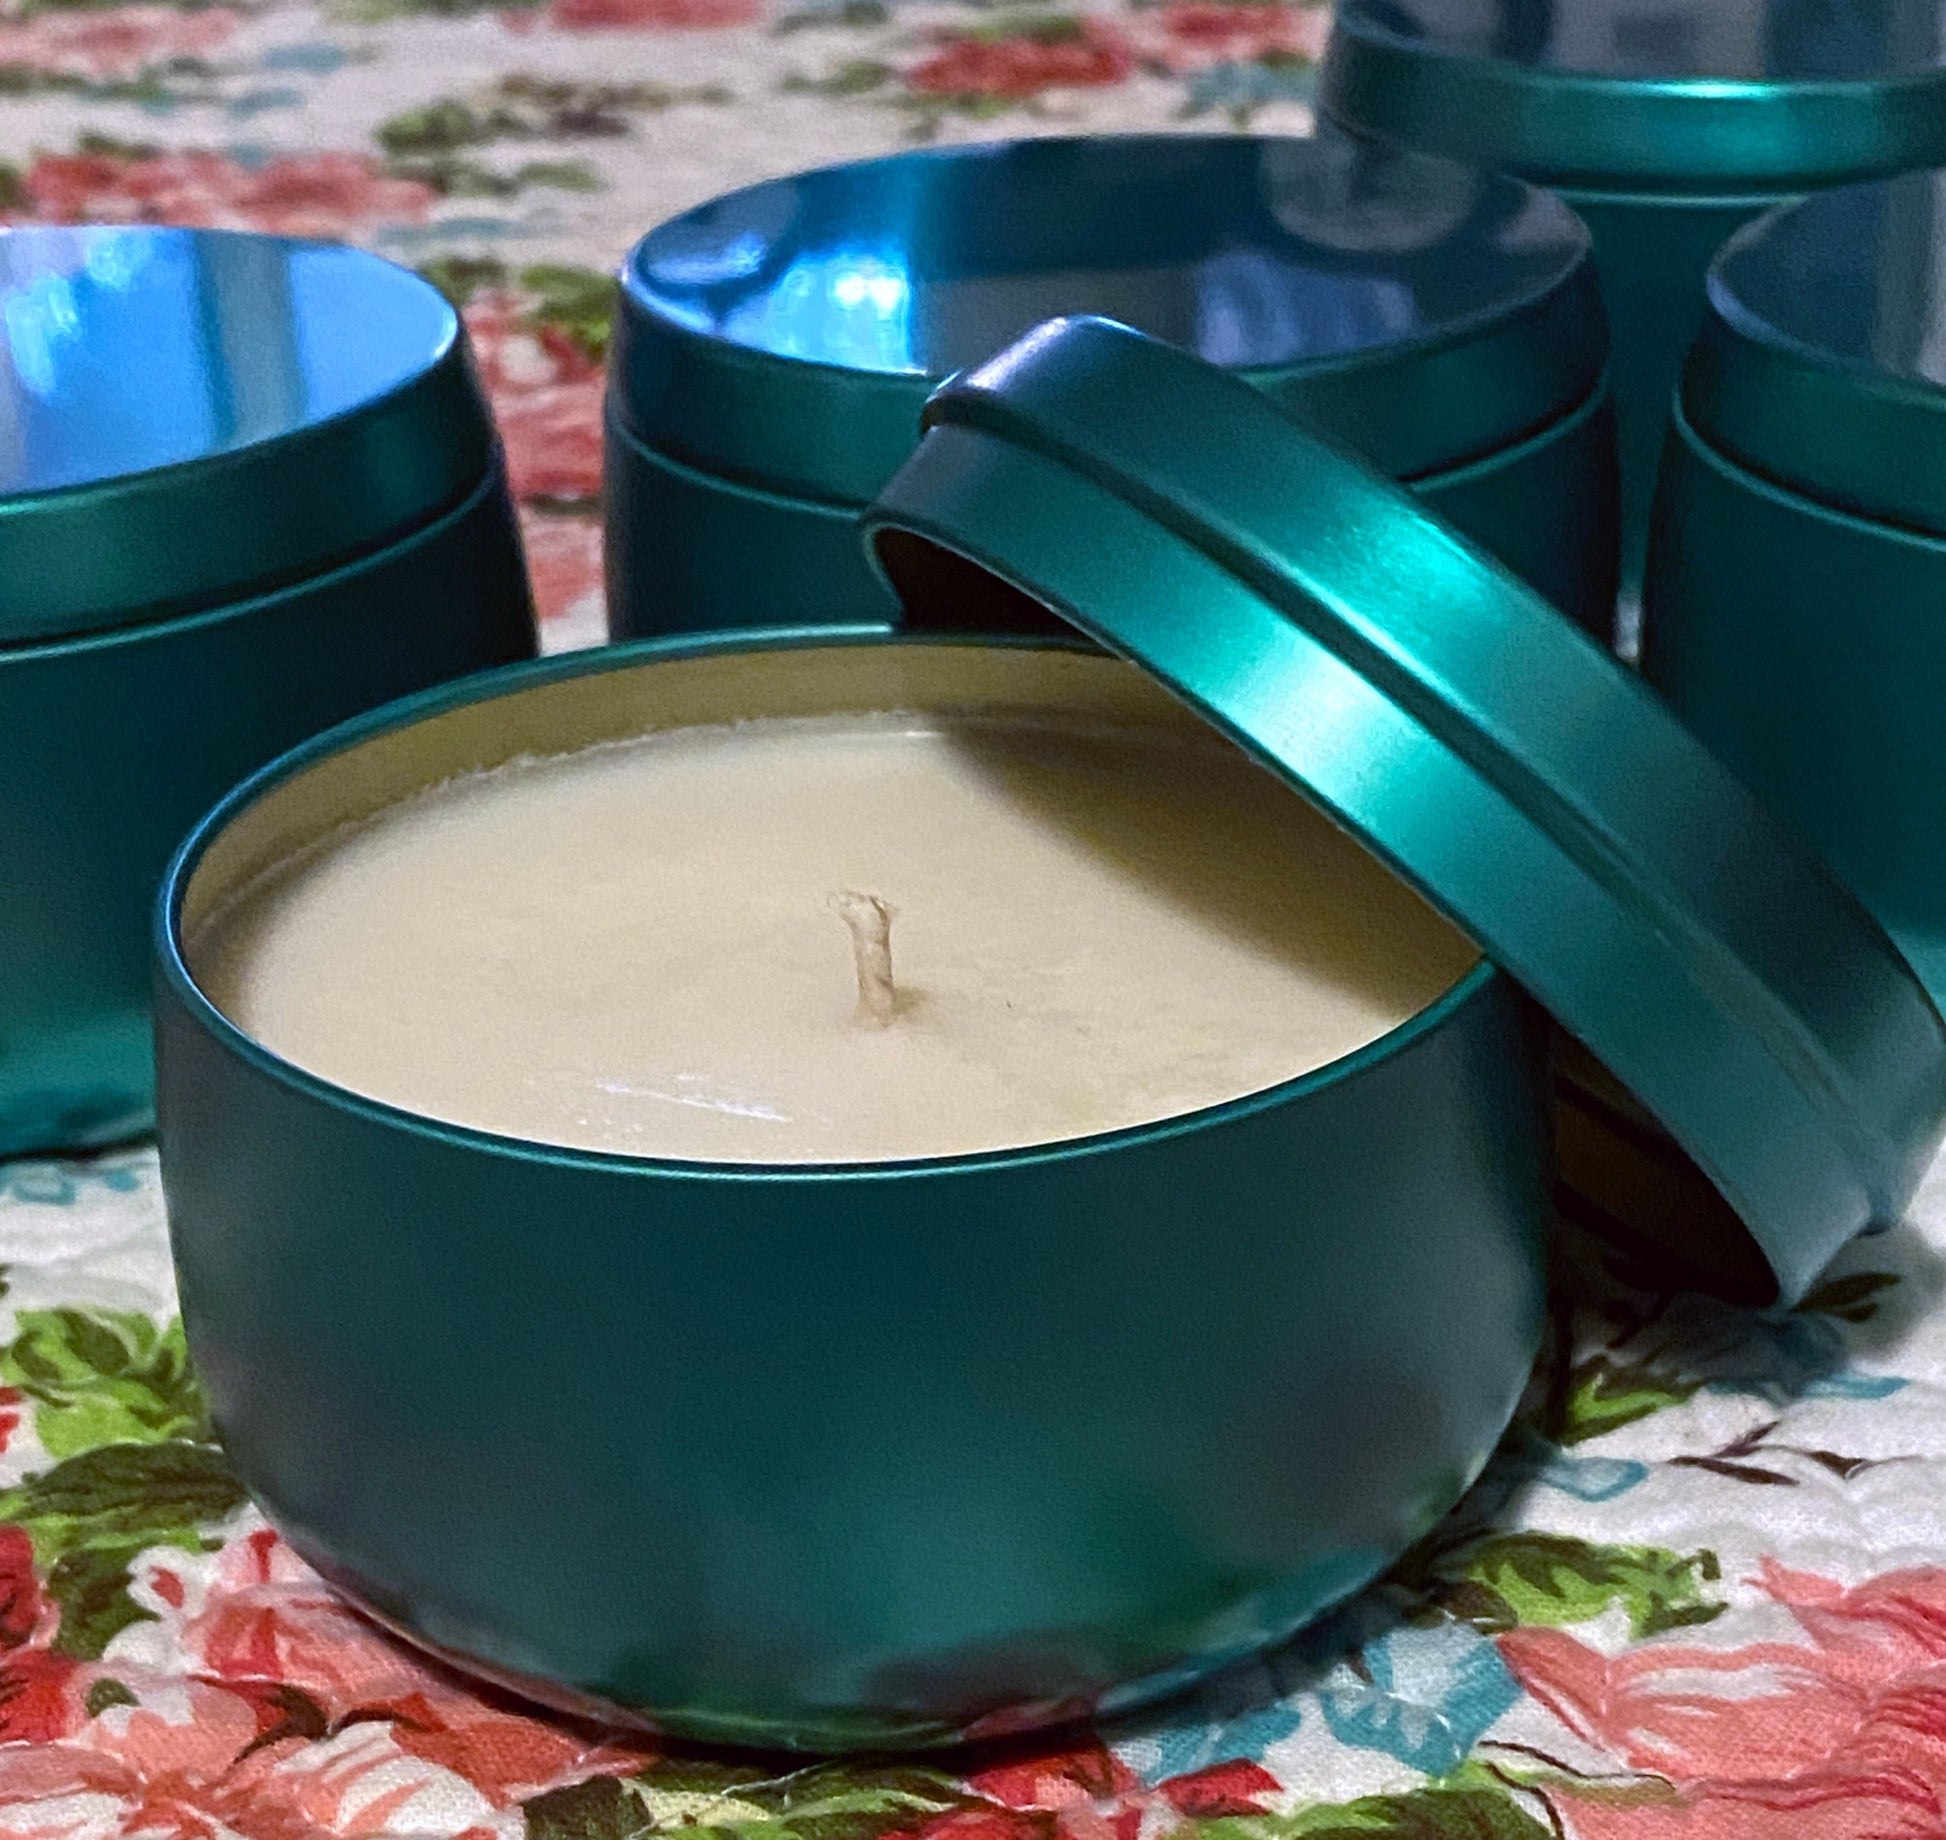 Fraser Fir hand-poured soy candle in our teal containe with cover